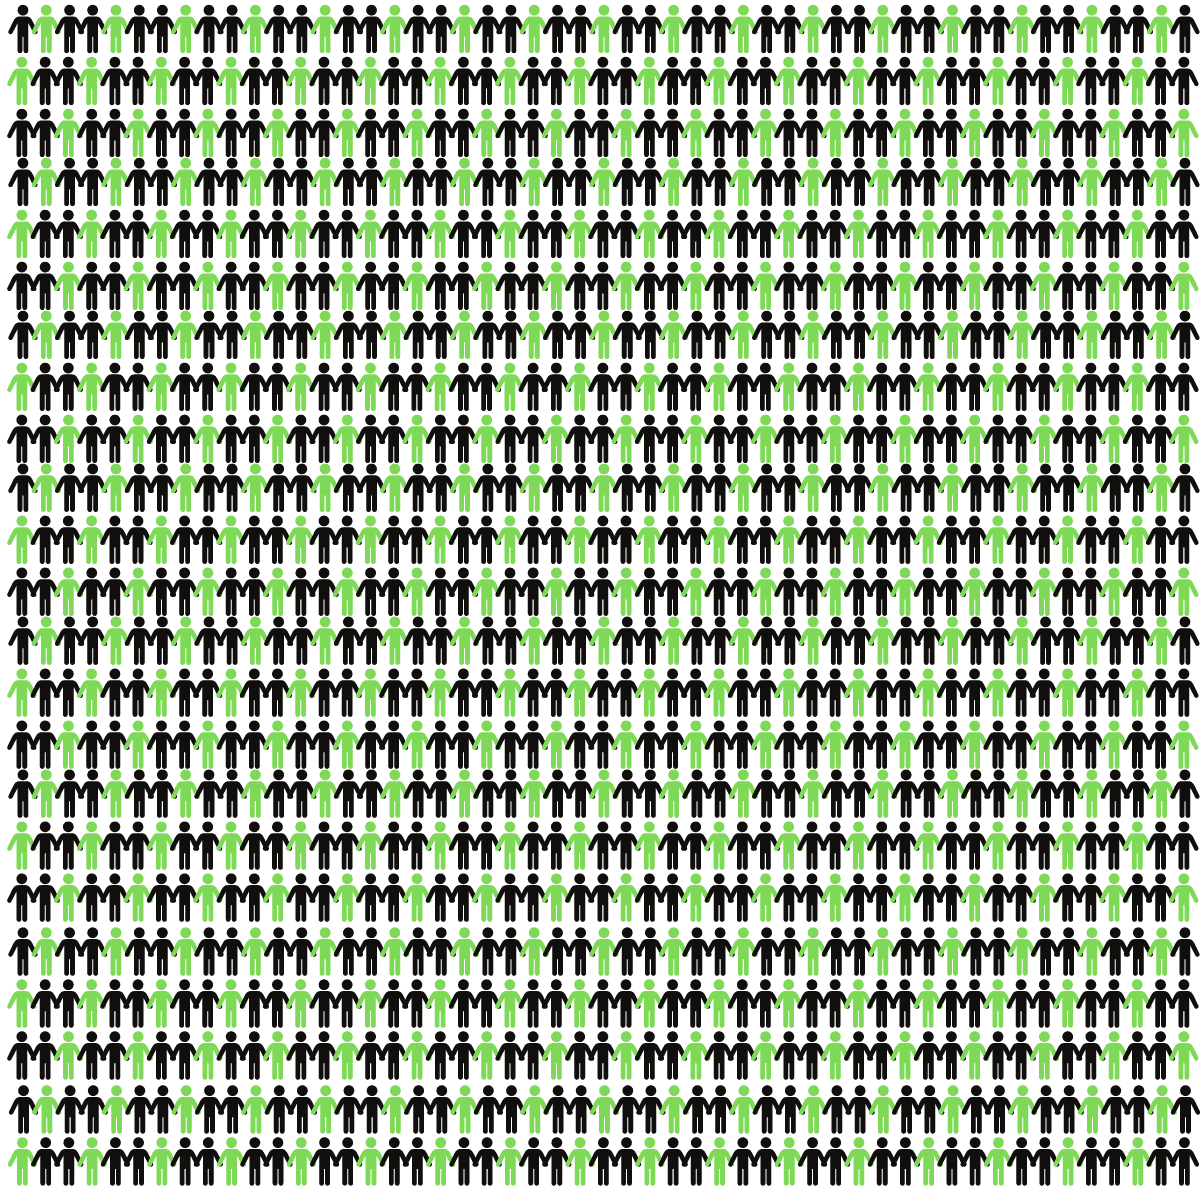 1000 stick figure people with 1 out of 3 colored green